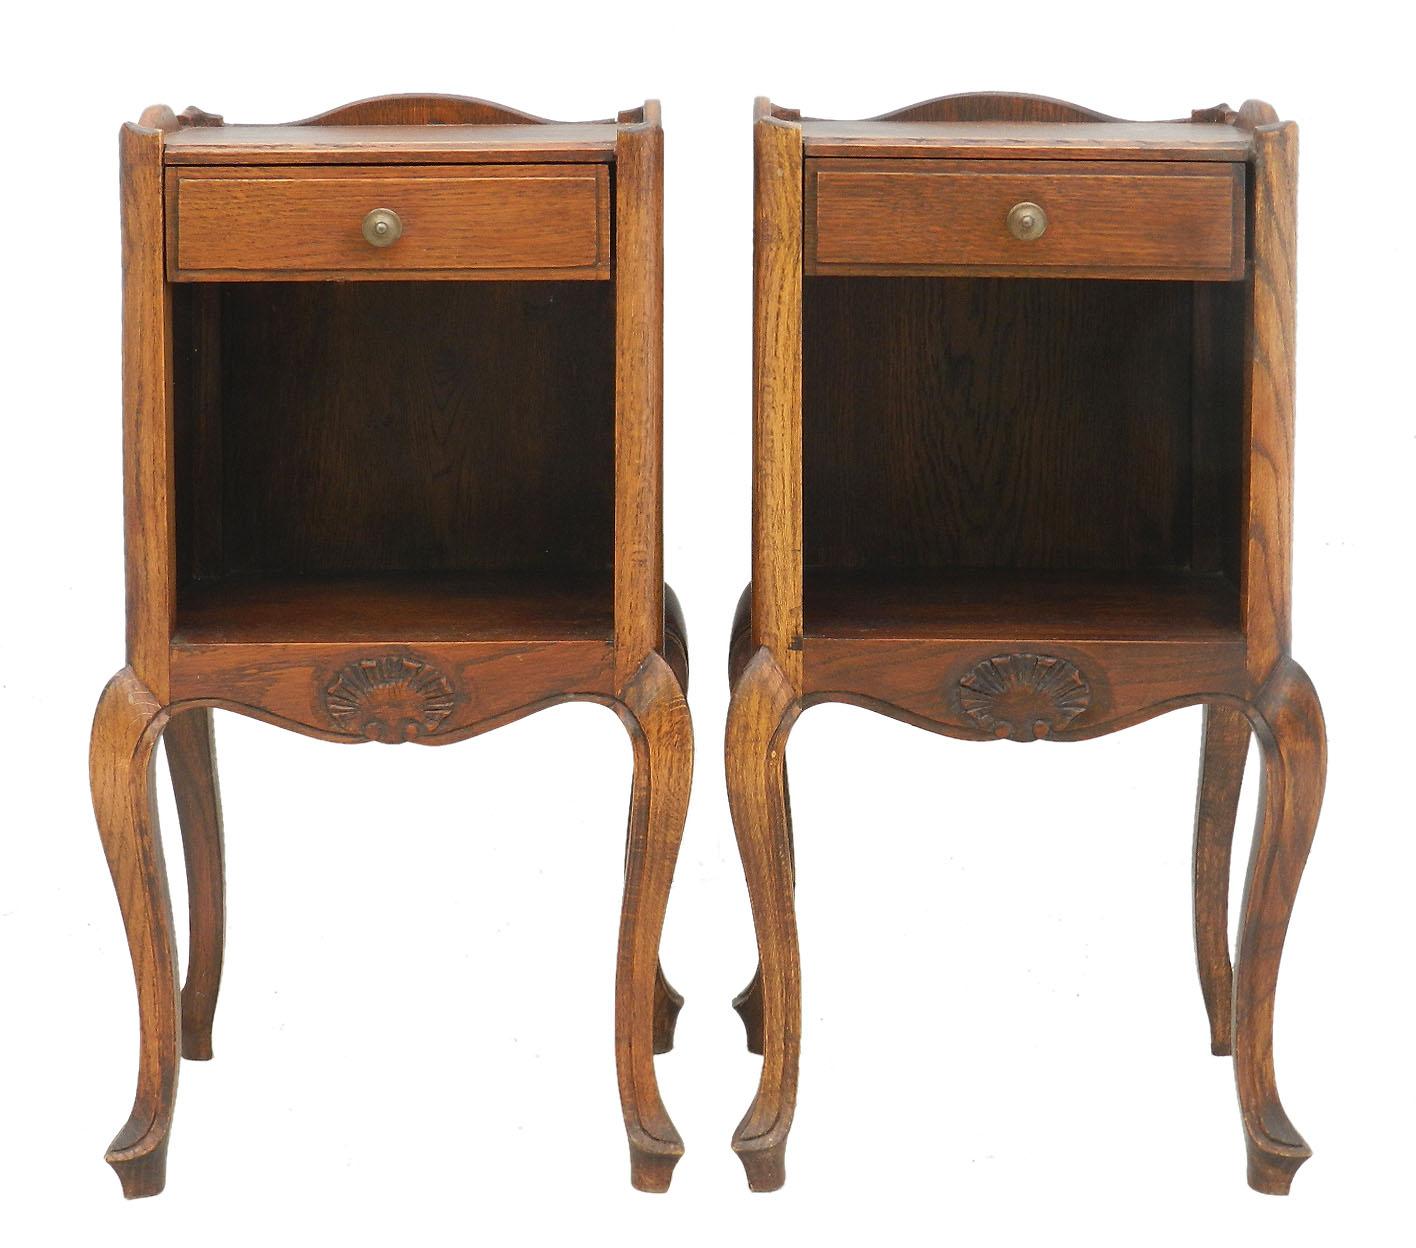 Pair of nightstands French provincial circa 1920 Louis revival
Side cabinets bedside tables
Carved oak
Each with a niche and a single drawer
Very good vintage condition with only minor signs of use
Measures: Height 71 cm (28.0